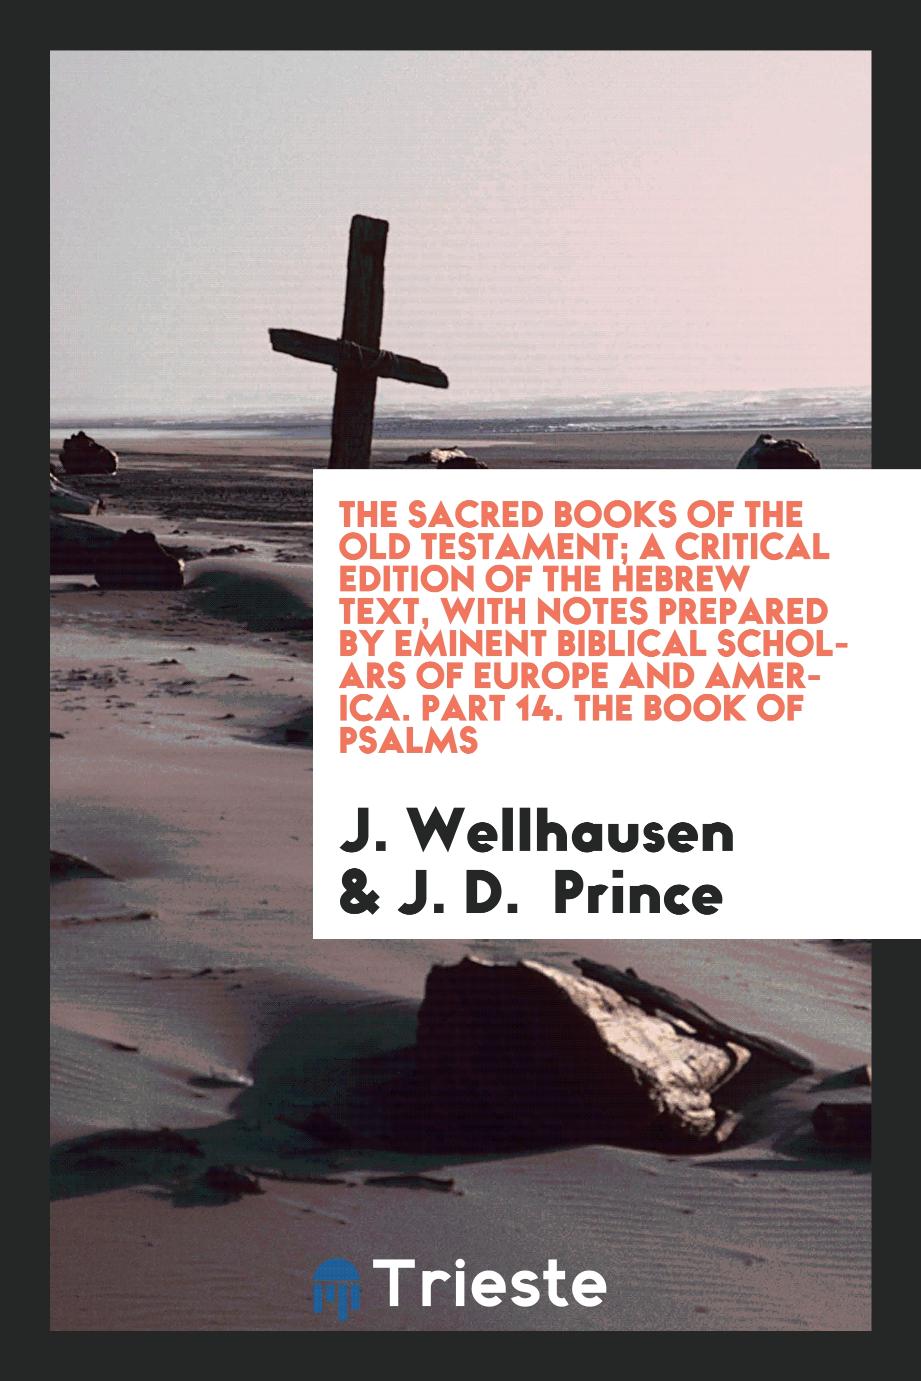 J. Wellhausen, J. D.  Prince - The Sacred Books of the Old Testament; A Critical Edition of the Hebrew Text, with Notes Prepared by Eminent Biblical Scholars of Europe and America. Part 14. The Book of Psalms